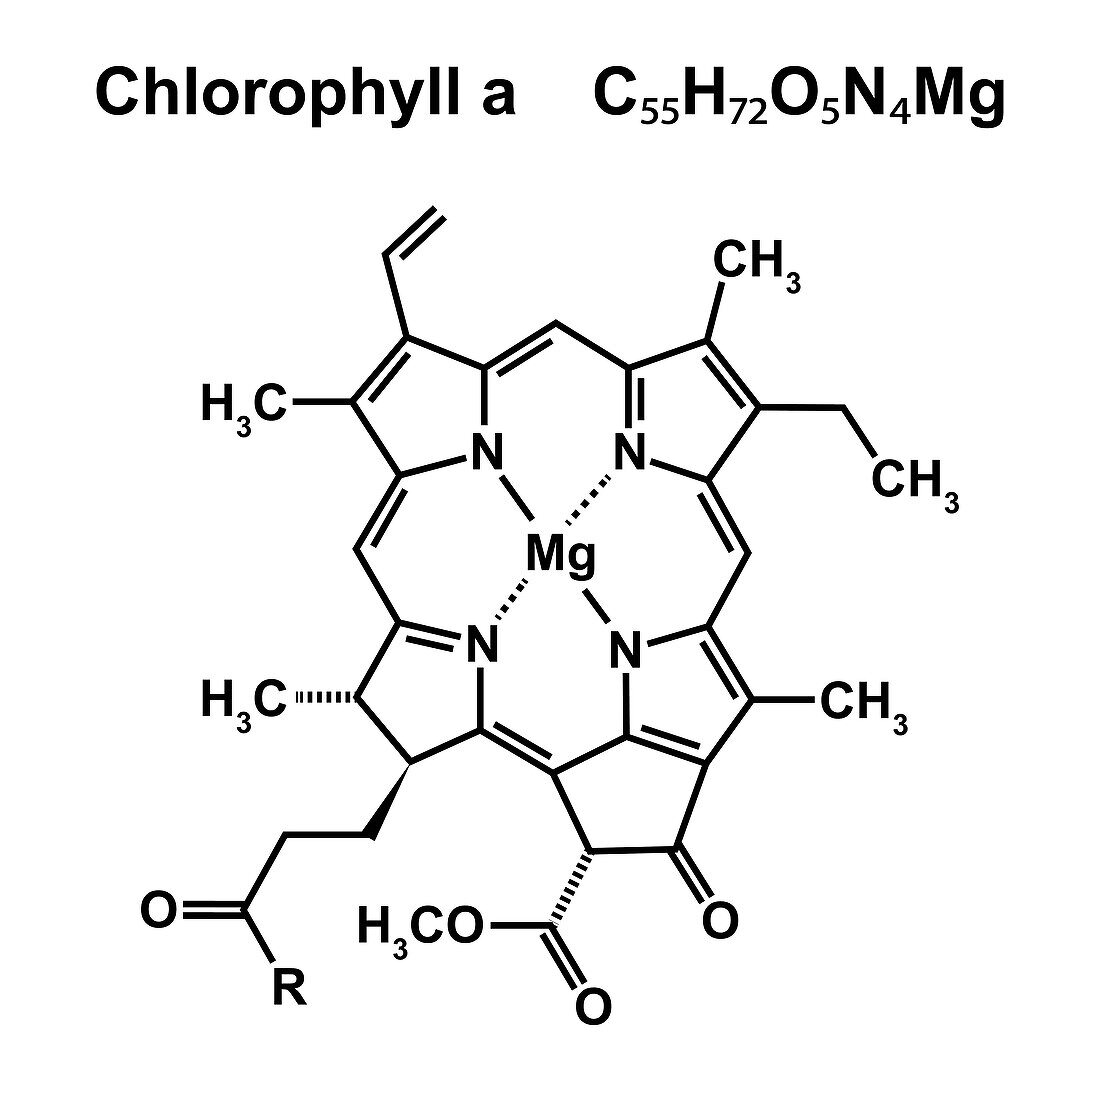 Chlorophyll a chemical structure, illustration.